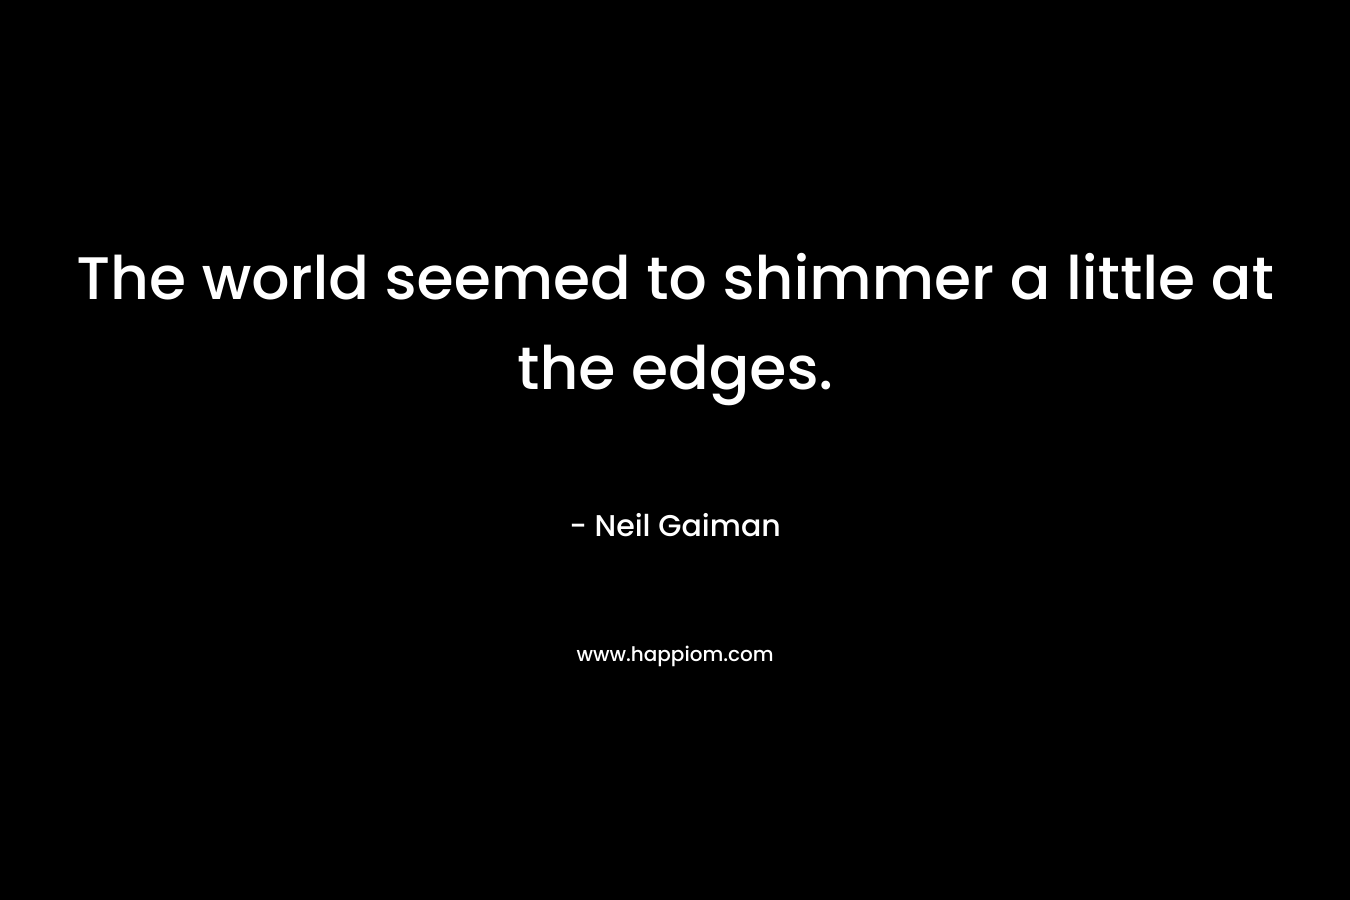 The world seemed to shimmer a little at the edges. – Neil Gaiman